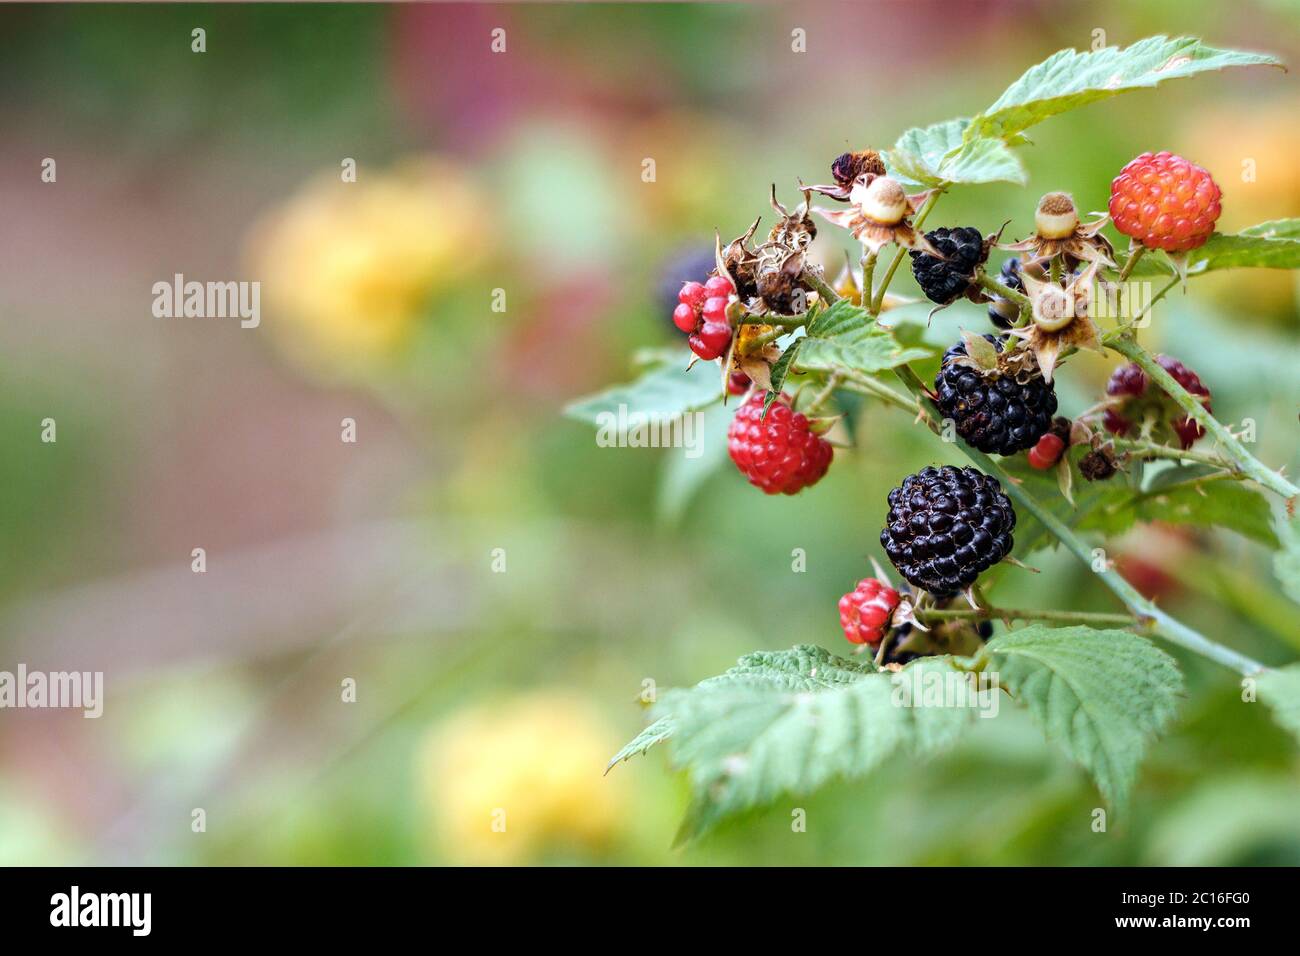 branch of blackberry with red and black berries, green leaves in the garden, copy space Stock Photo